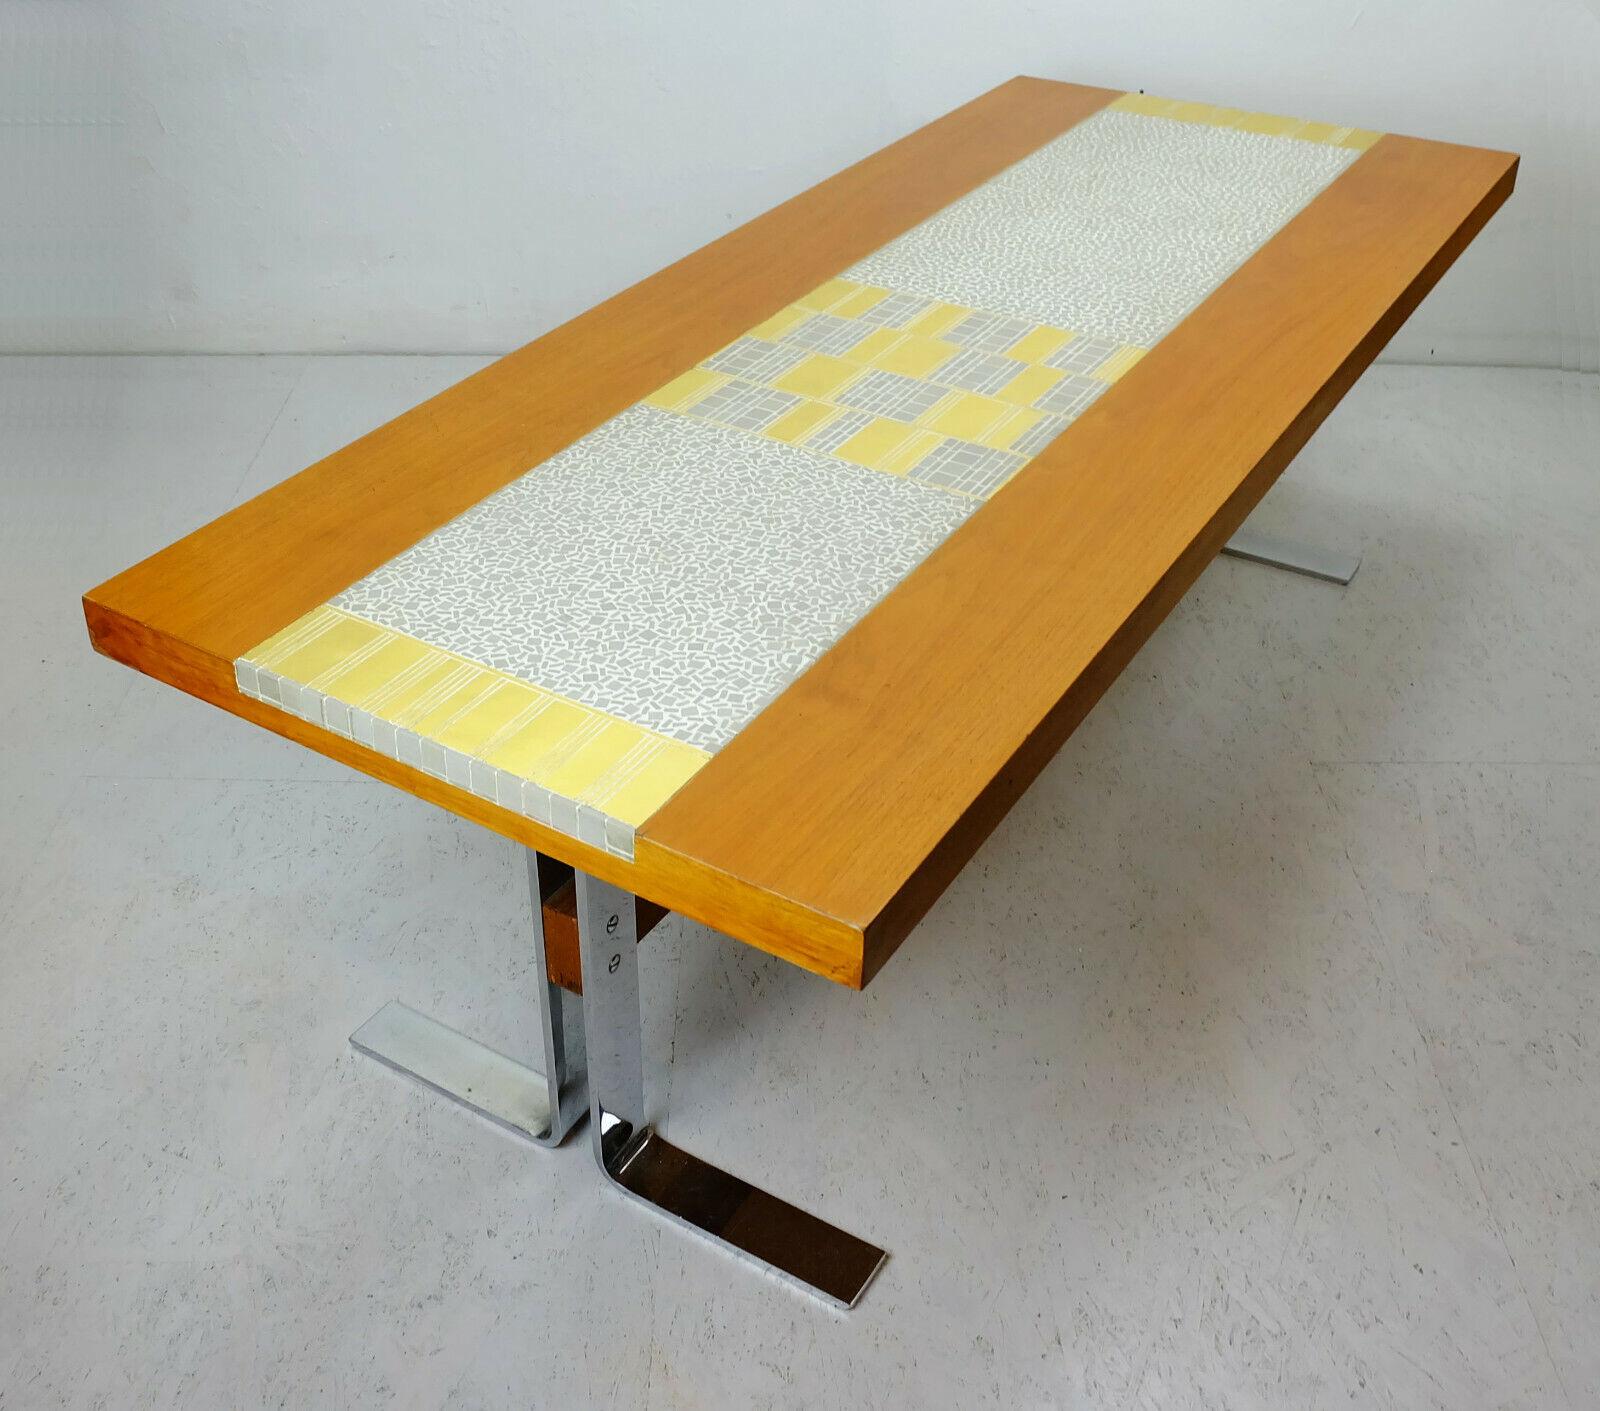 1960s Coffee Table Walnut with Gray and Gold Mosaic and Chrome Base In Good Condition For Sale In Mannheim, DE